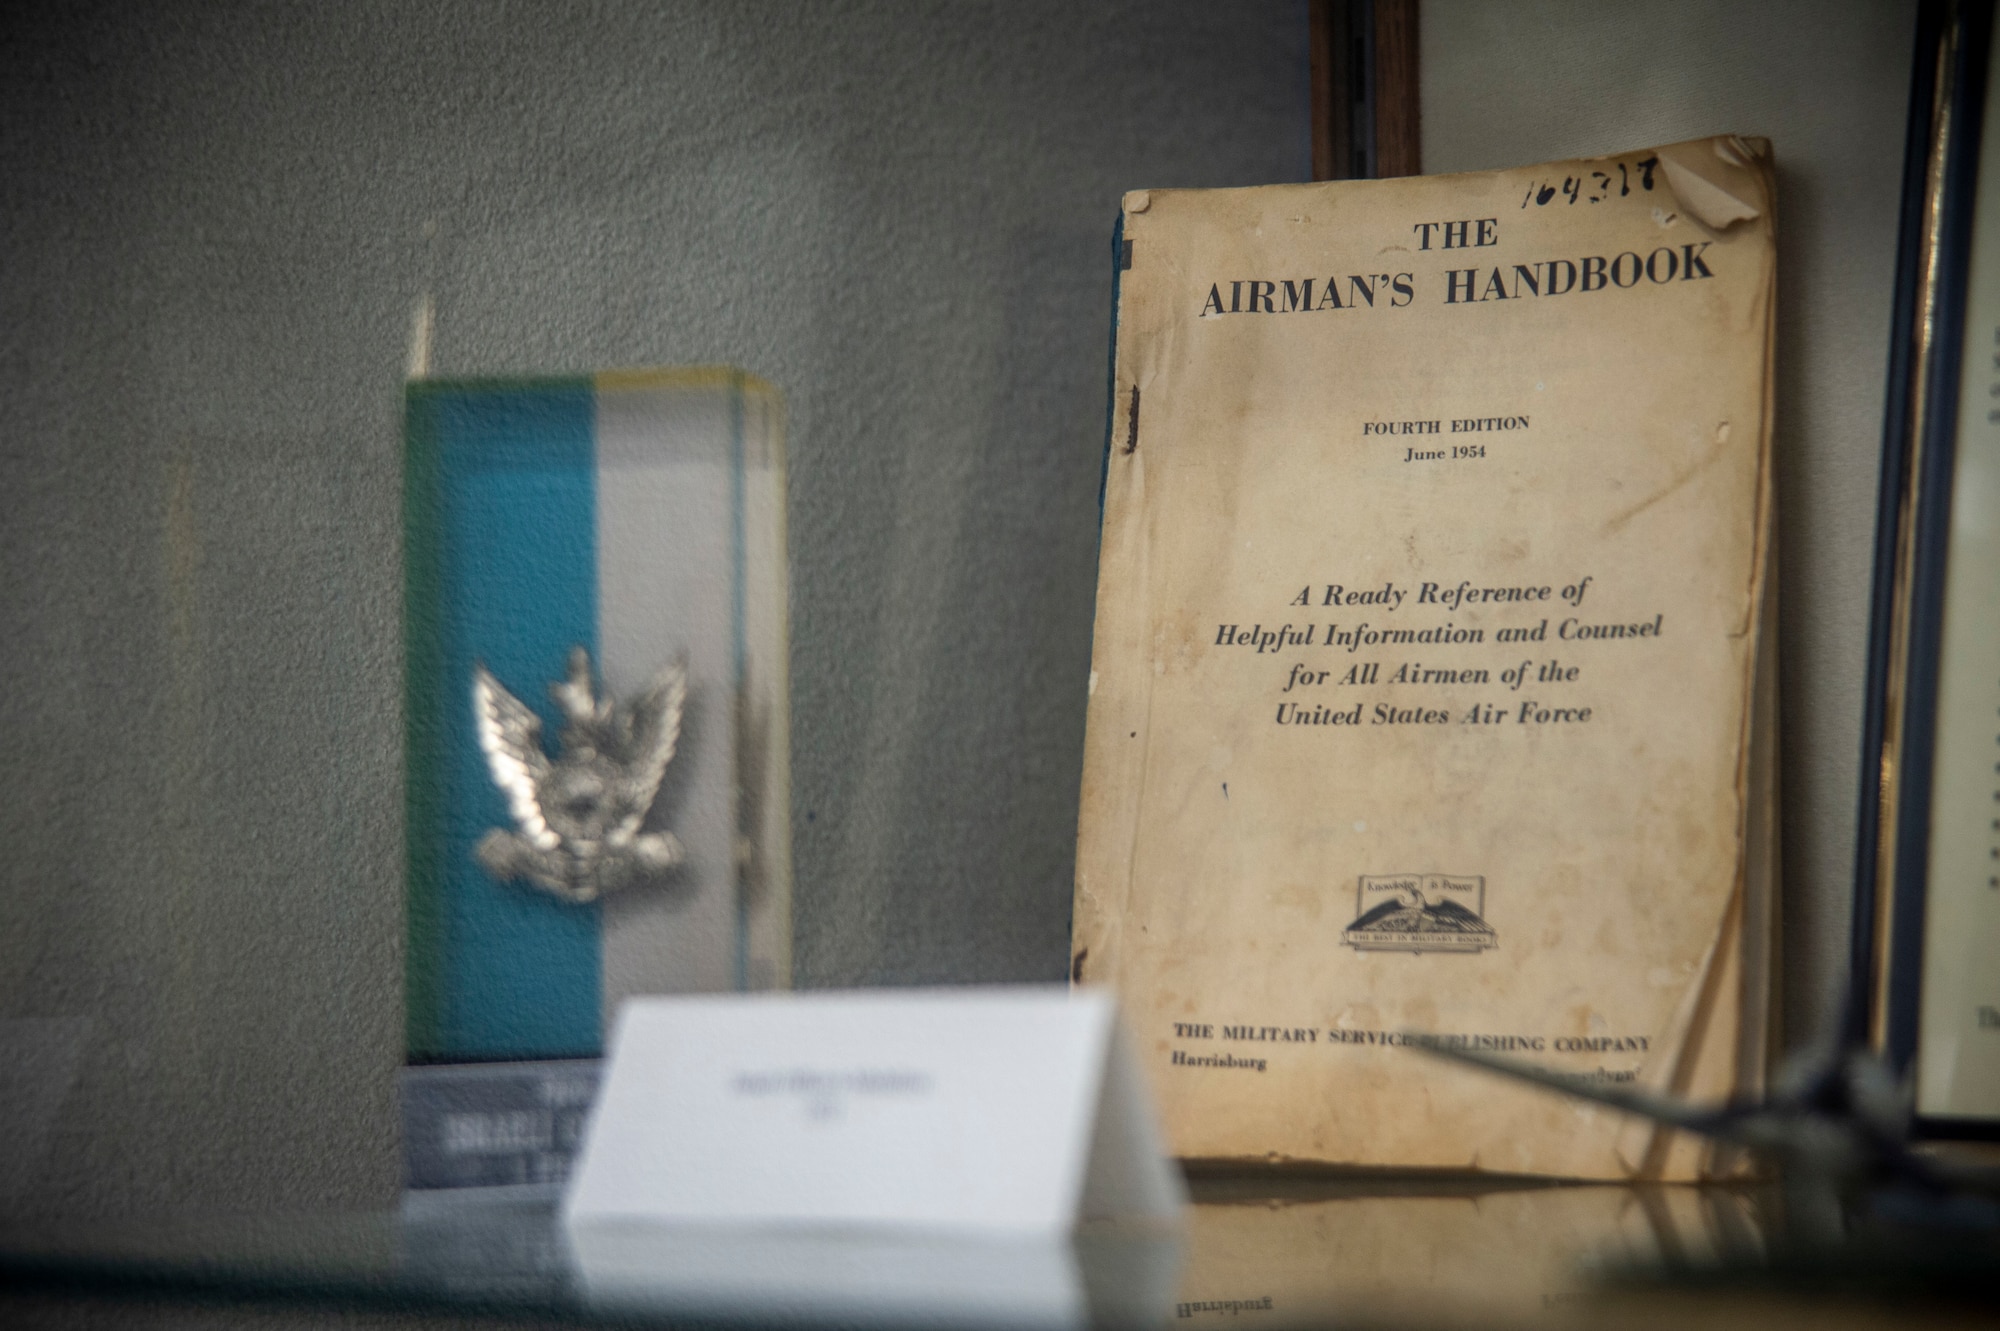 A copy of the Airman’s Handbook from 1954 is showcased in a display cabinet in the Airman Leadership School auditorium March 2, 2022, at MacDill Air Force Base, Florida. ALS is the first level of Professional Military Education that enlisted Airmen experience, teaching them entry-level leadership skills to prepare Airmen for positions of greater responsibility. (U.S. Air Force photo by Senior Airmen David D. McLoney)